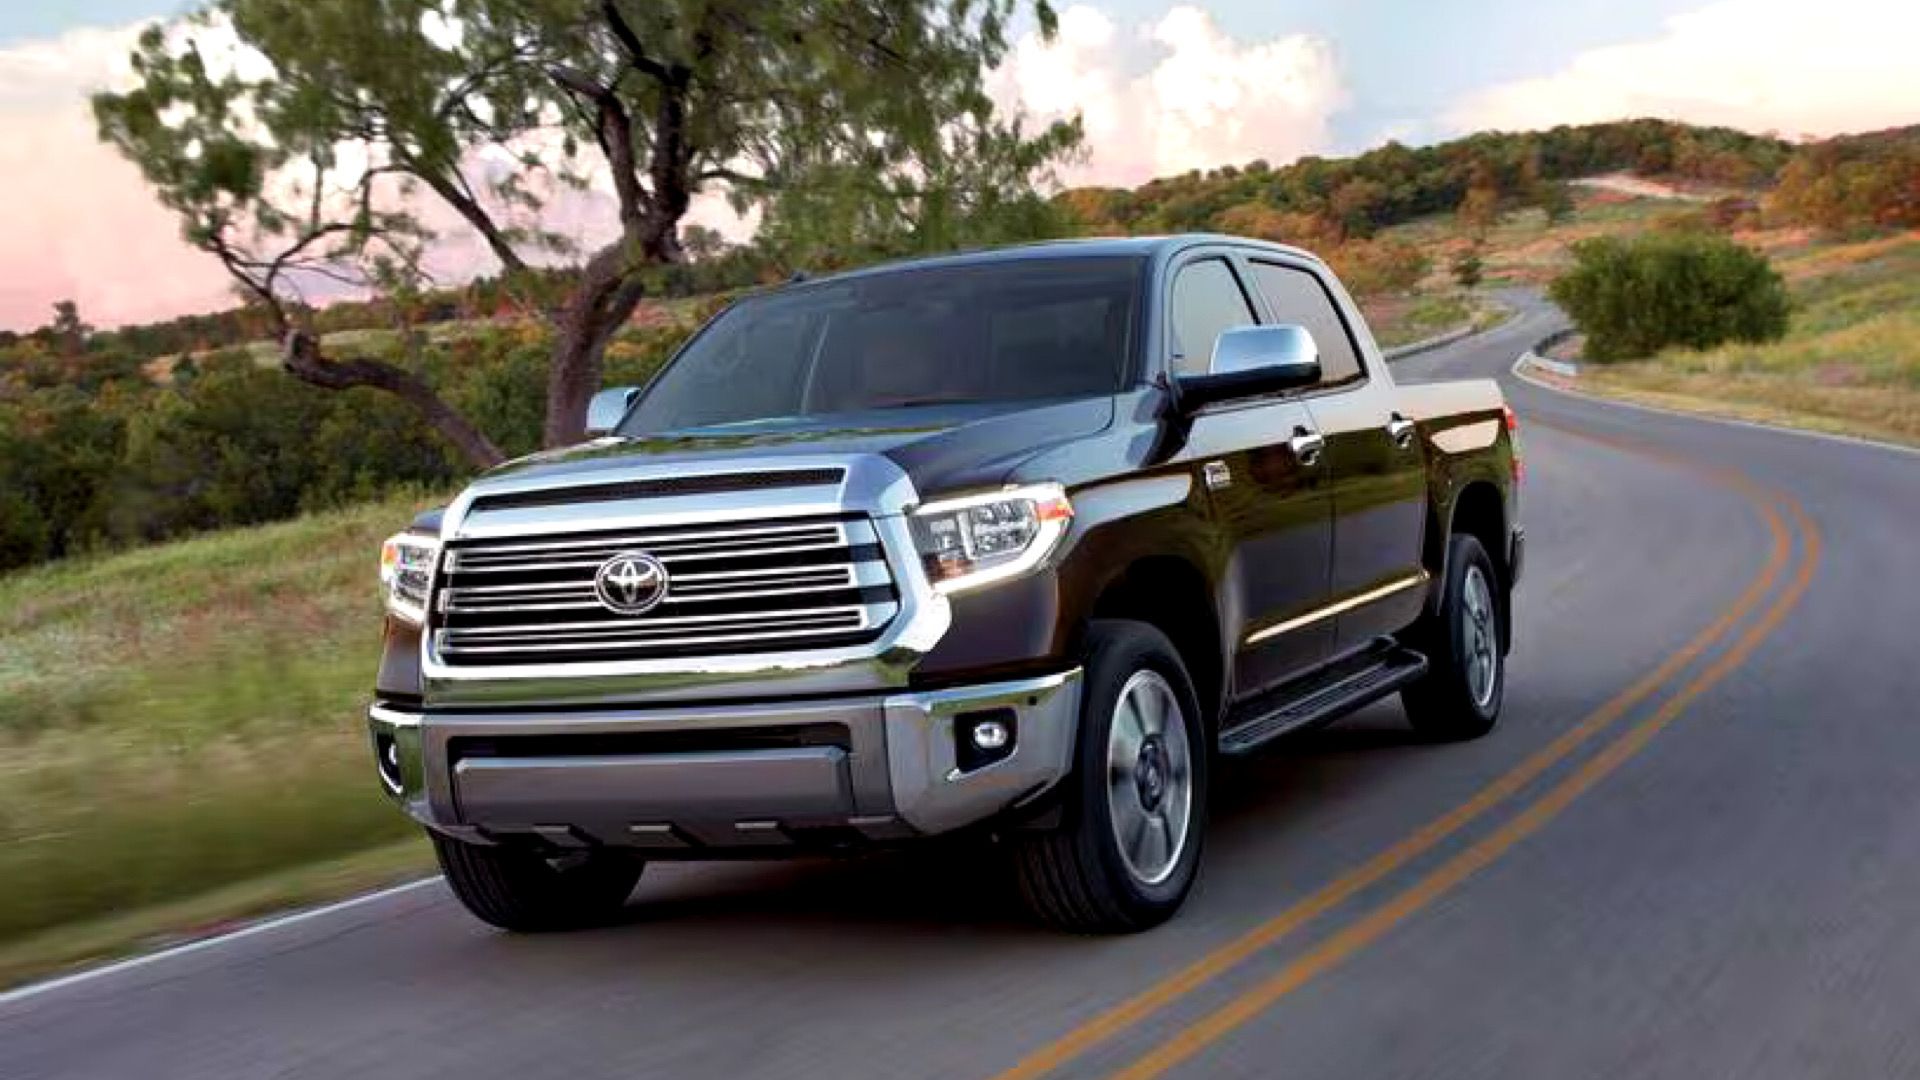 2021 Toyota Tundra Posing in black Posing on country road